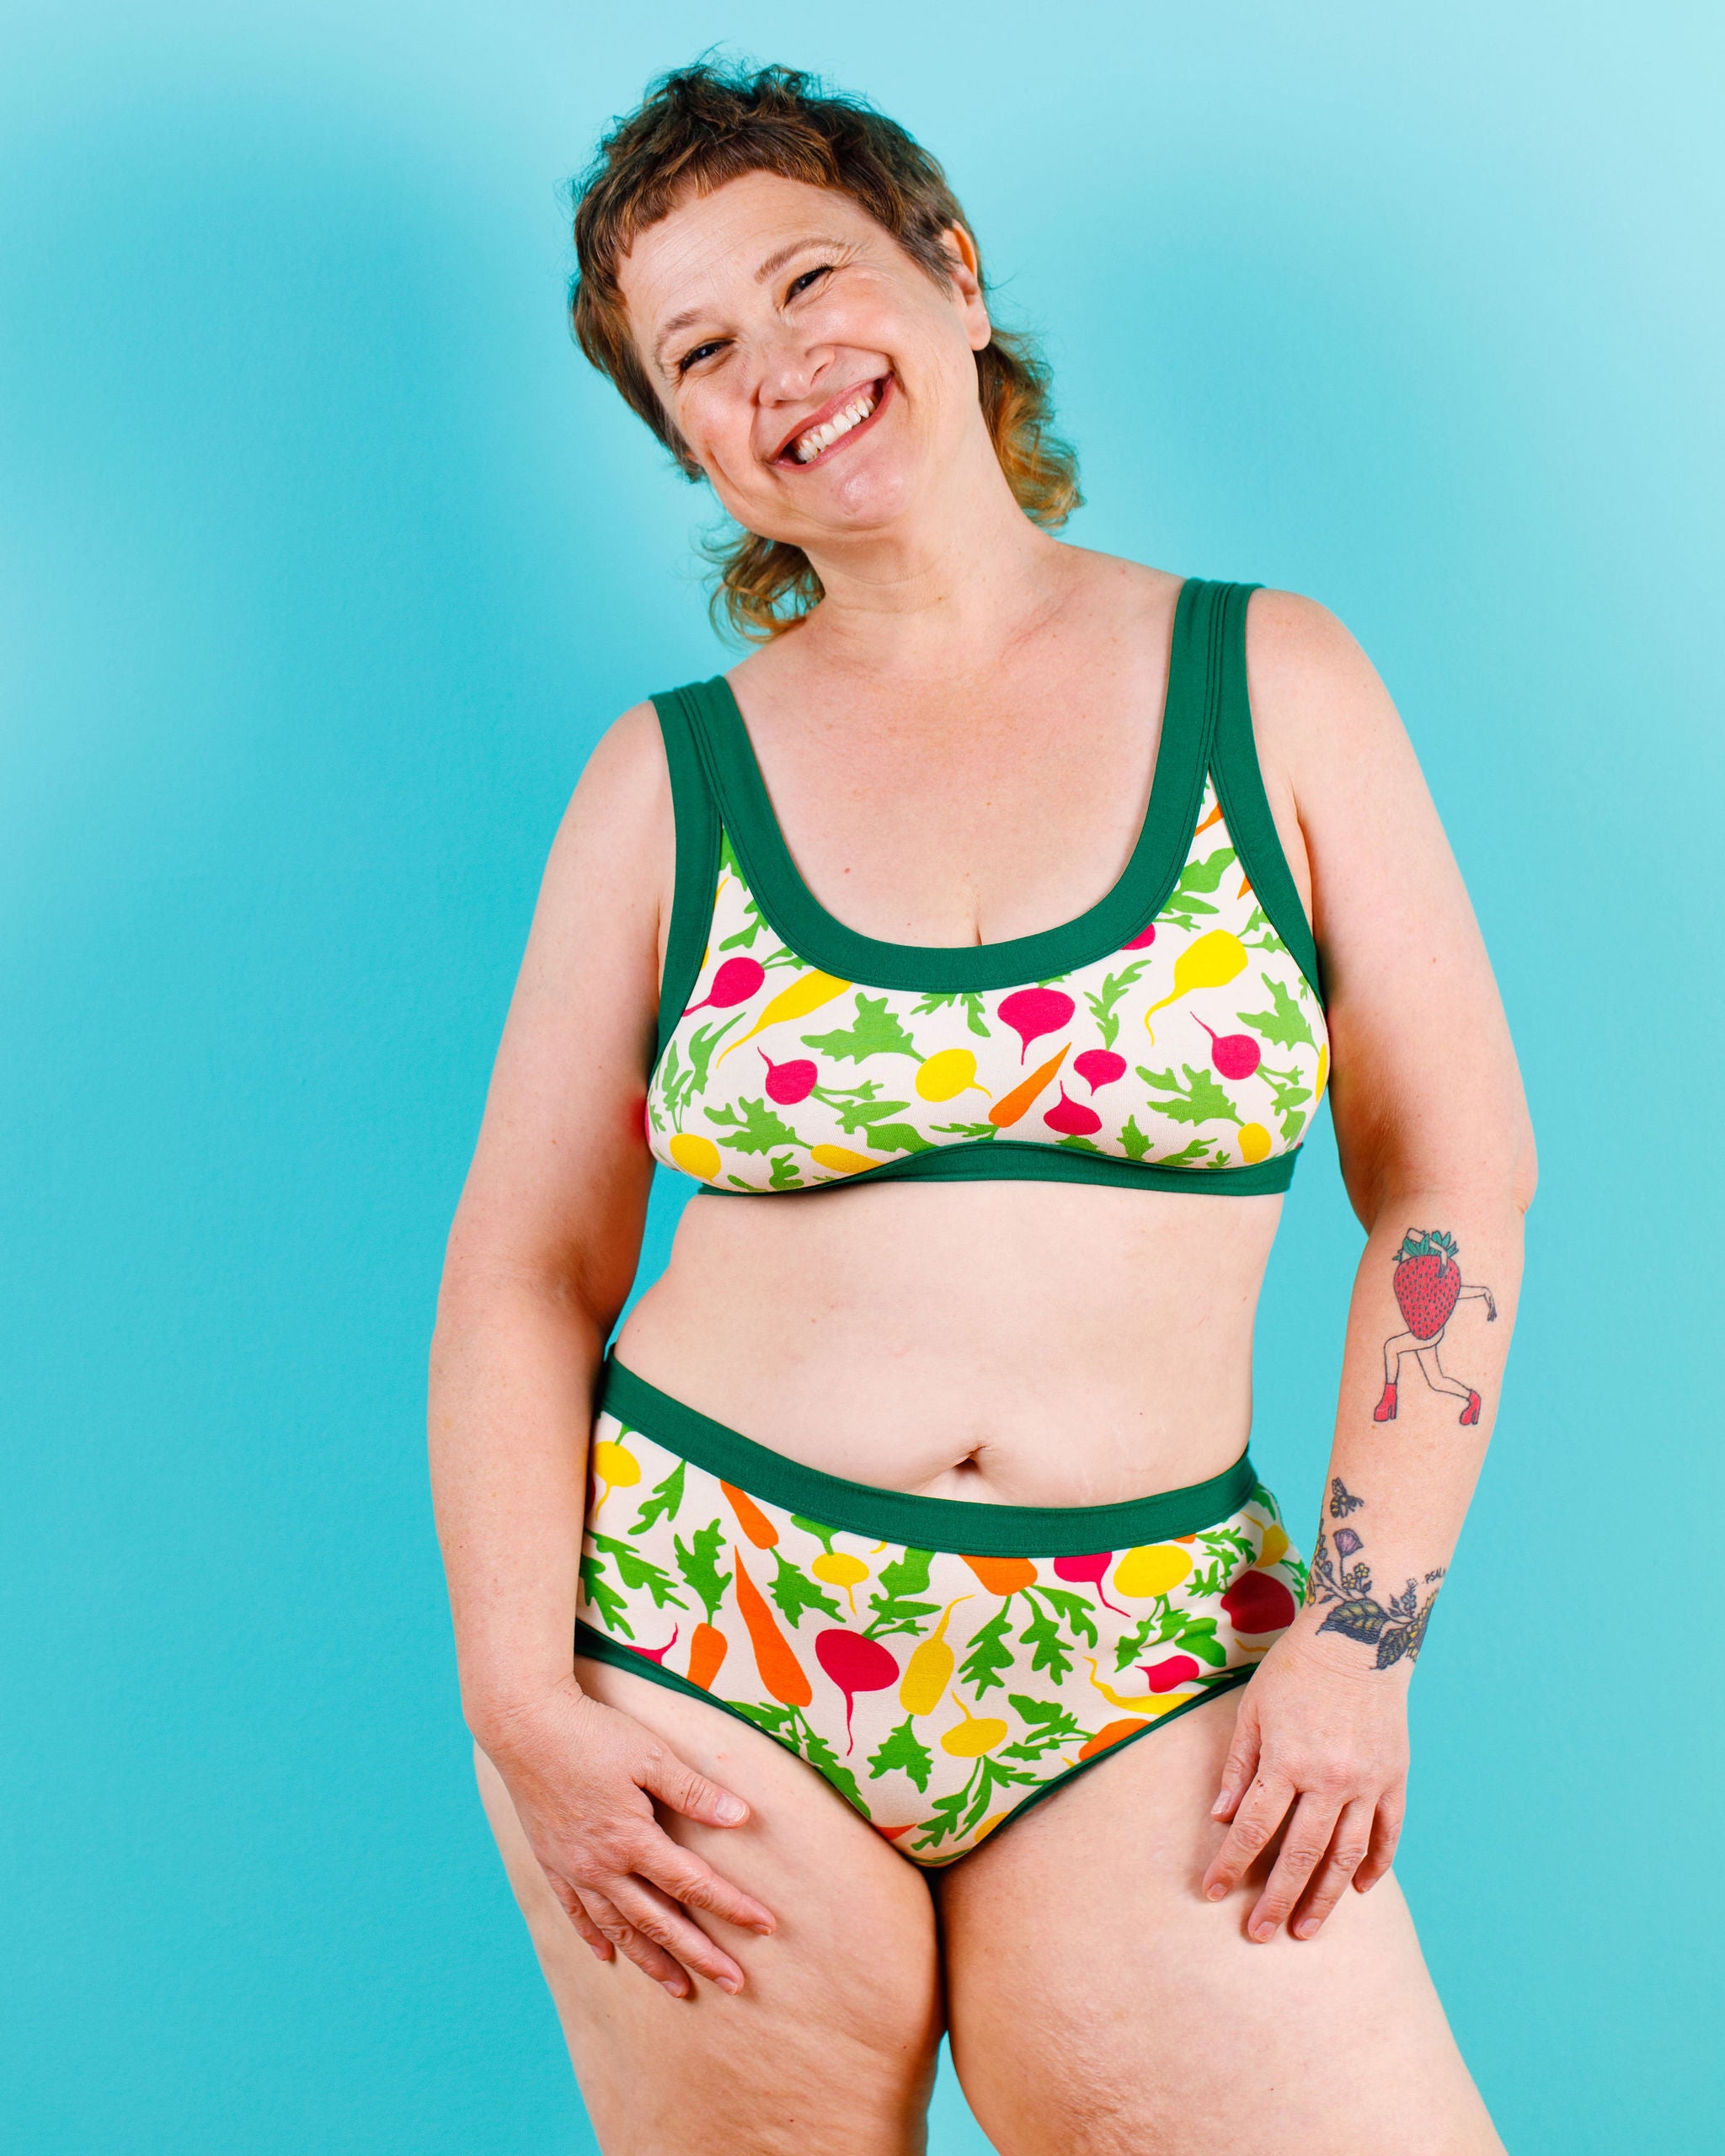 Model smiling wearing  Thunderants Hipster style underwear and matching Bralette in Root Veggies print - yellow, orange, pink, and green vegetables.